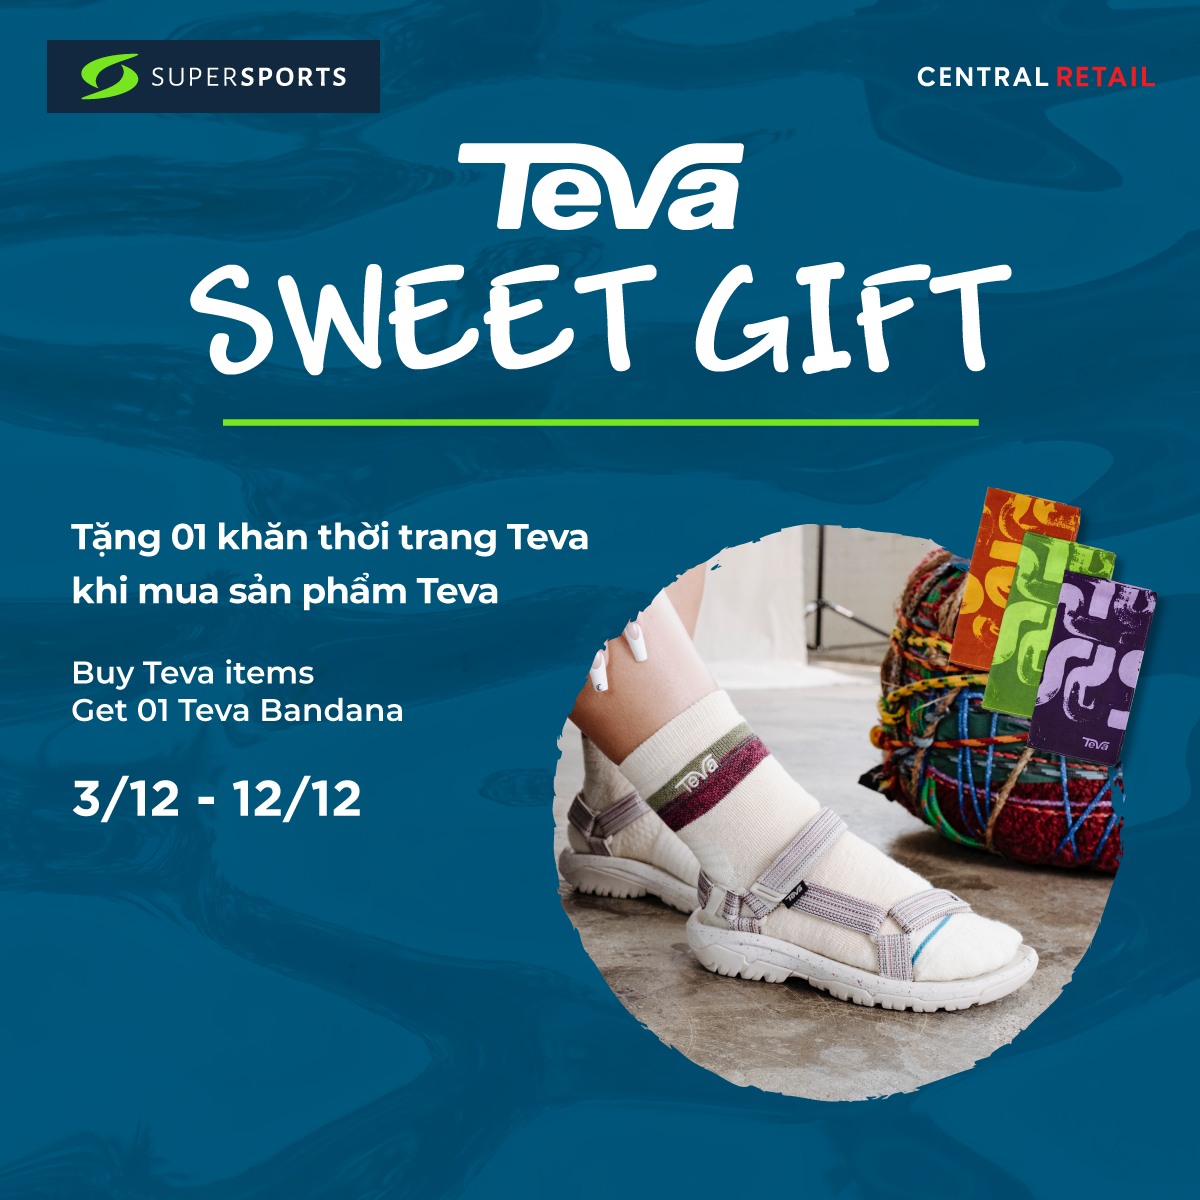 💗 GIFT WITH PURCHASE FROM TEVA, A BOLD BANDANA - NICE & ELEGANT FOR YOUR OUTFIT